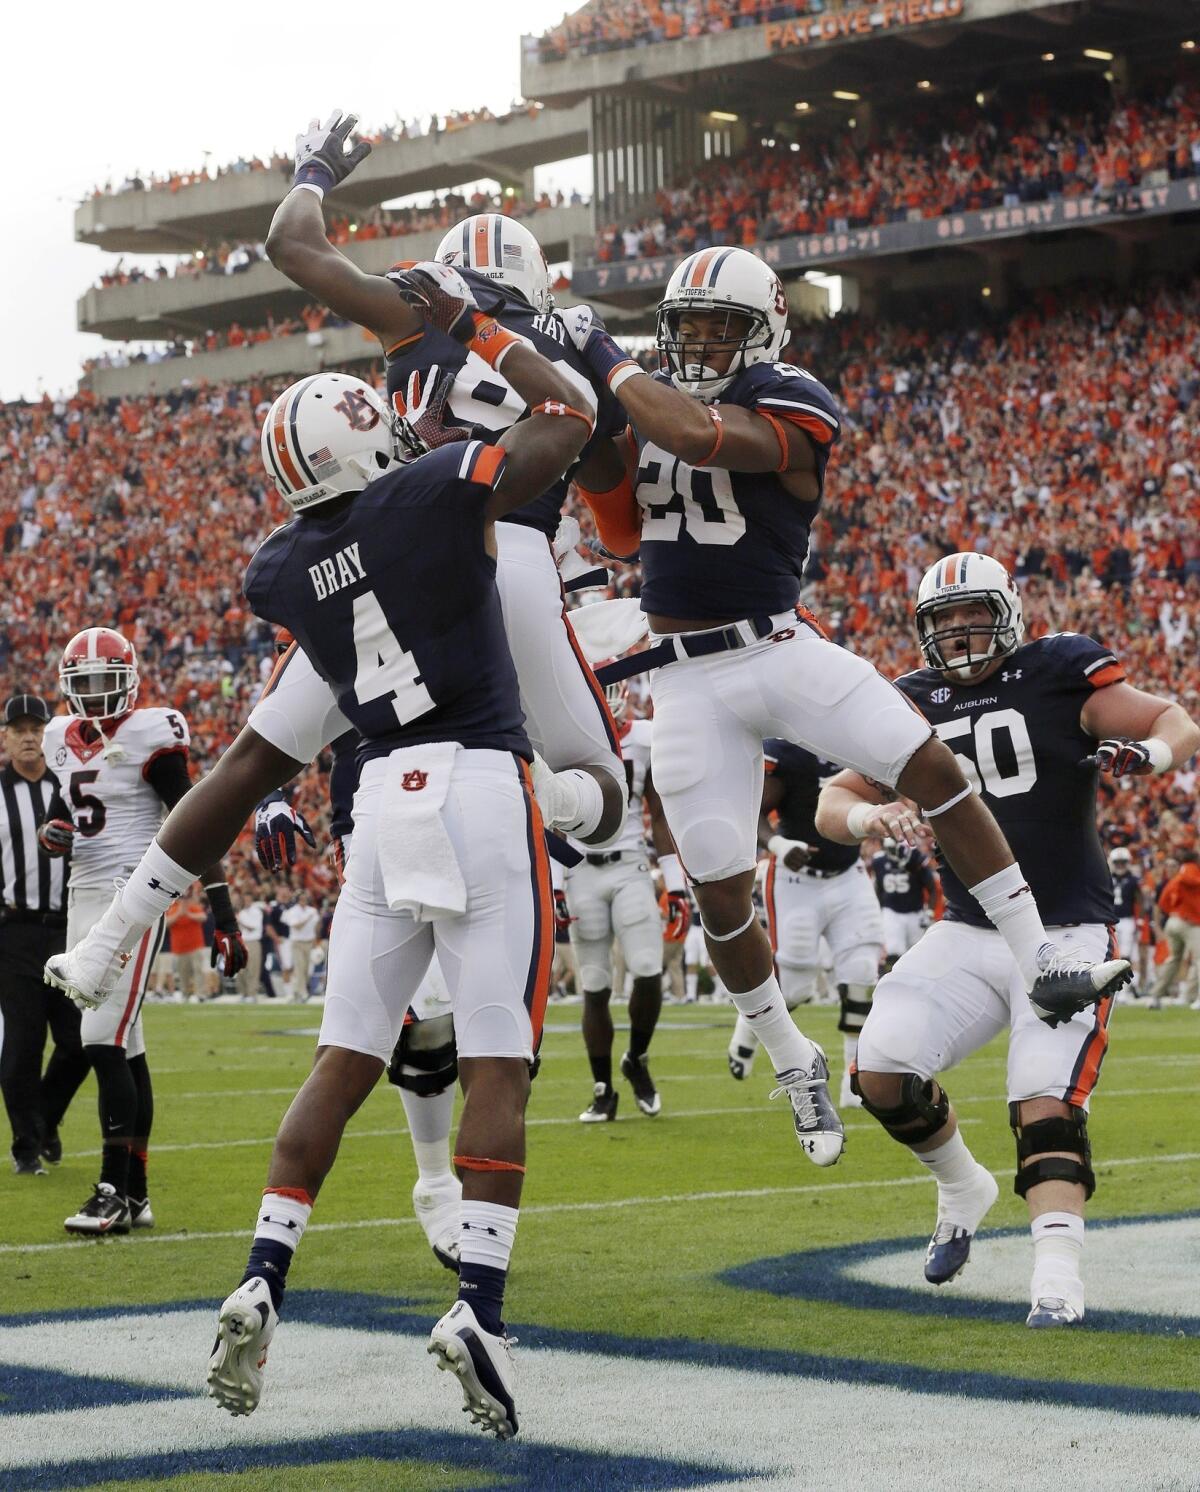 Auburn running back Corey Grant, right, celebrates with teammates Quan Bray, left, and Melvin Ray after scoring a touchdown in Saturday's 43-38 win over Georgia. The Tigers still have a chance of making the BCS title game heading into their showdown with top-ranked Alabama on Nov. 30.